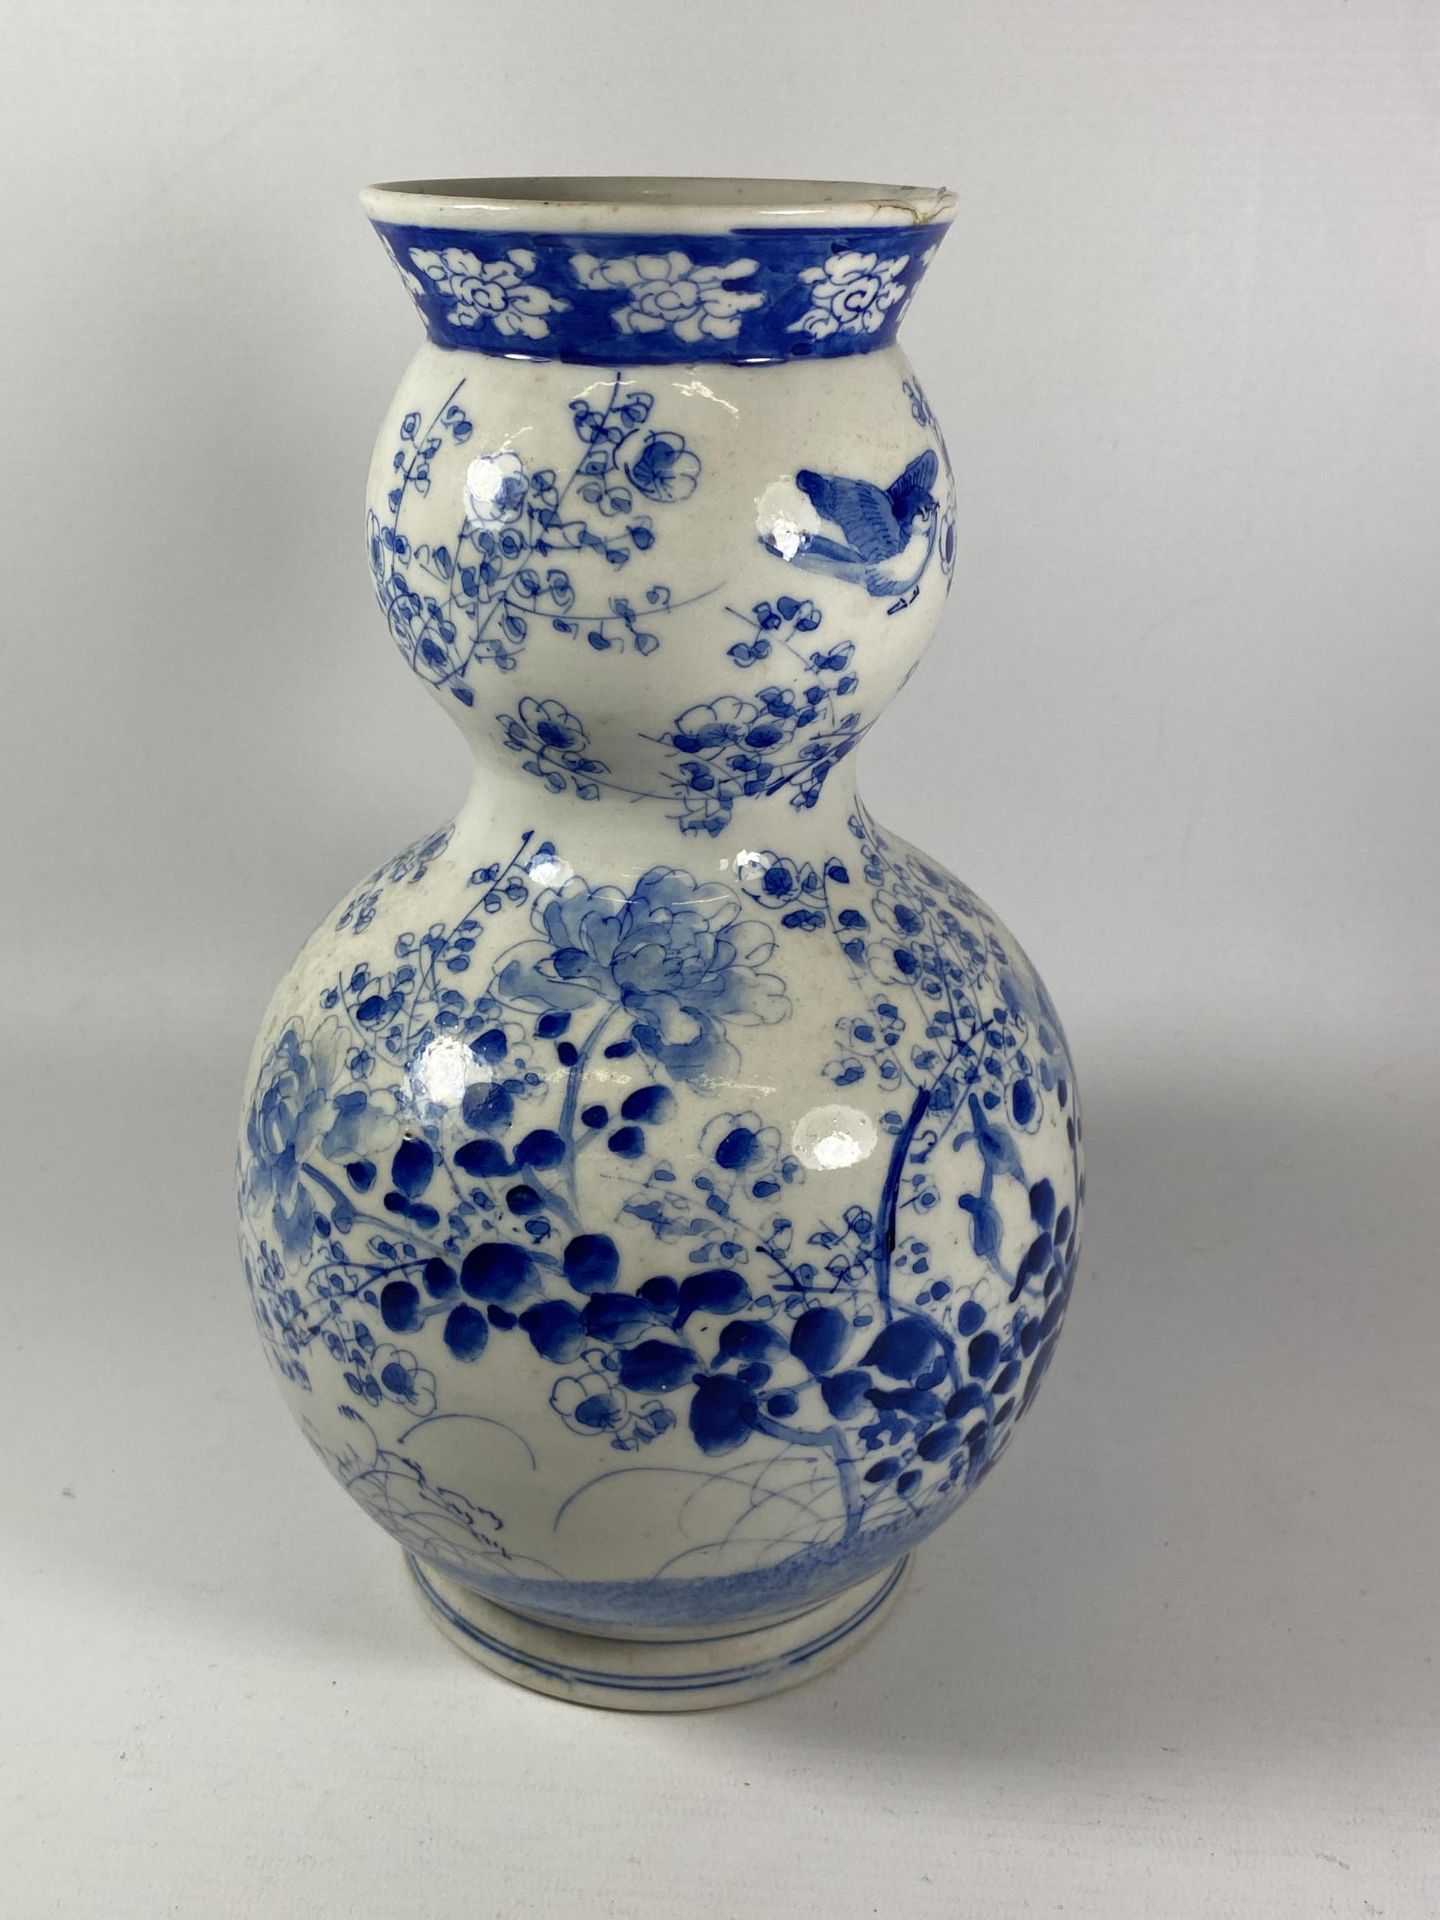 A JAPANESE MEIJI PERIOD (1868-1912) BLUE AND WHITE DOUBLE GOURD VASE, HEIGHT 26CM - Image 2 of 5